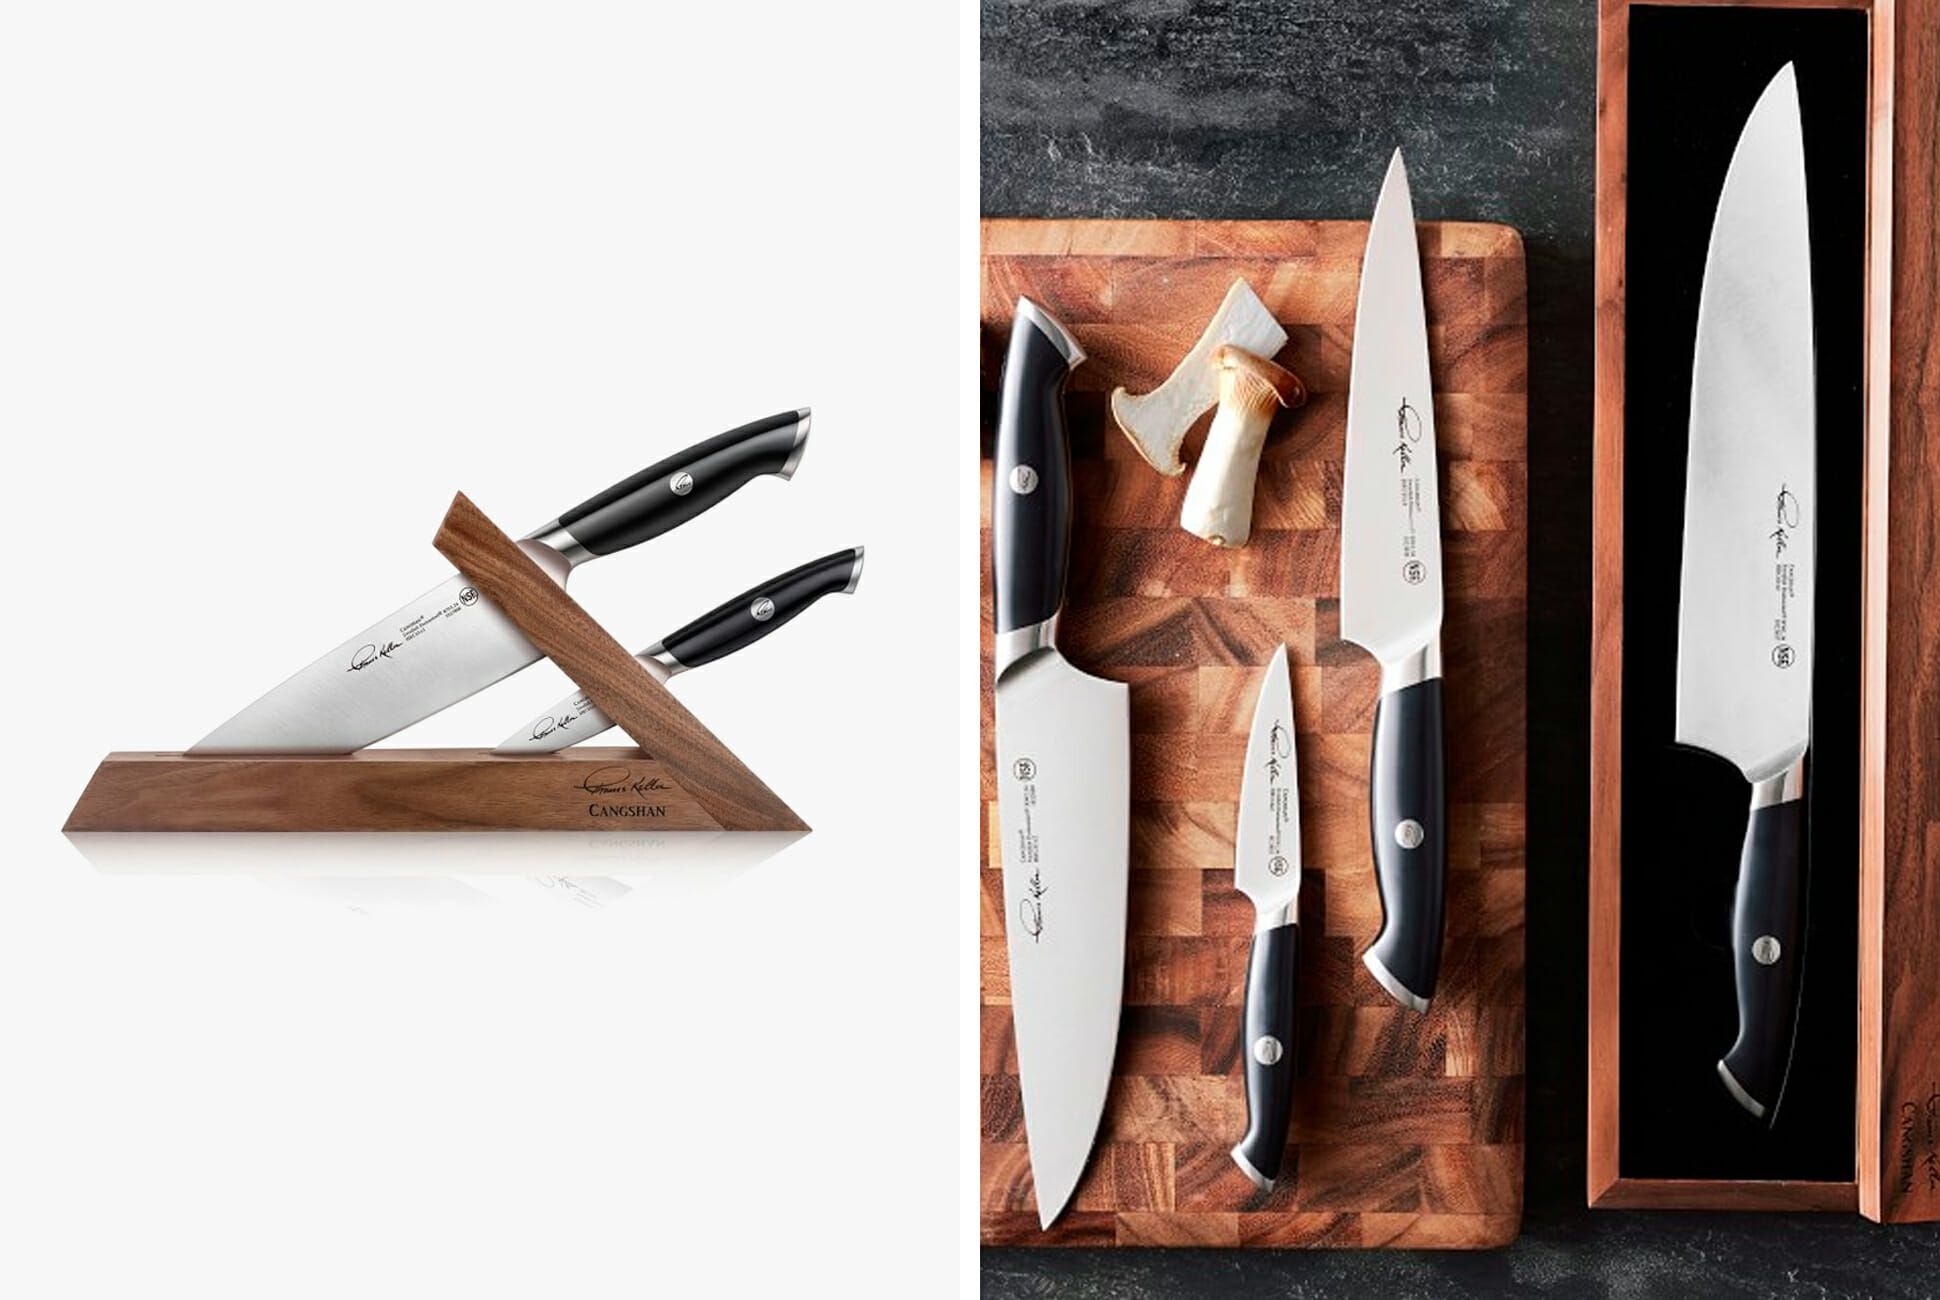 With their wide range of knives, Cangshan has a line that caters to the needs of all chefs. From the versatile chef's knife to the precise paring knife, you can find the perfect tool for any culinary task. Plus, Cangshan offers a variety of knife sets, so you can have all the essentials in one convenient package.